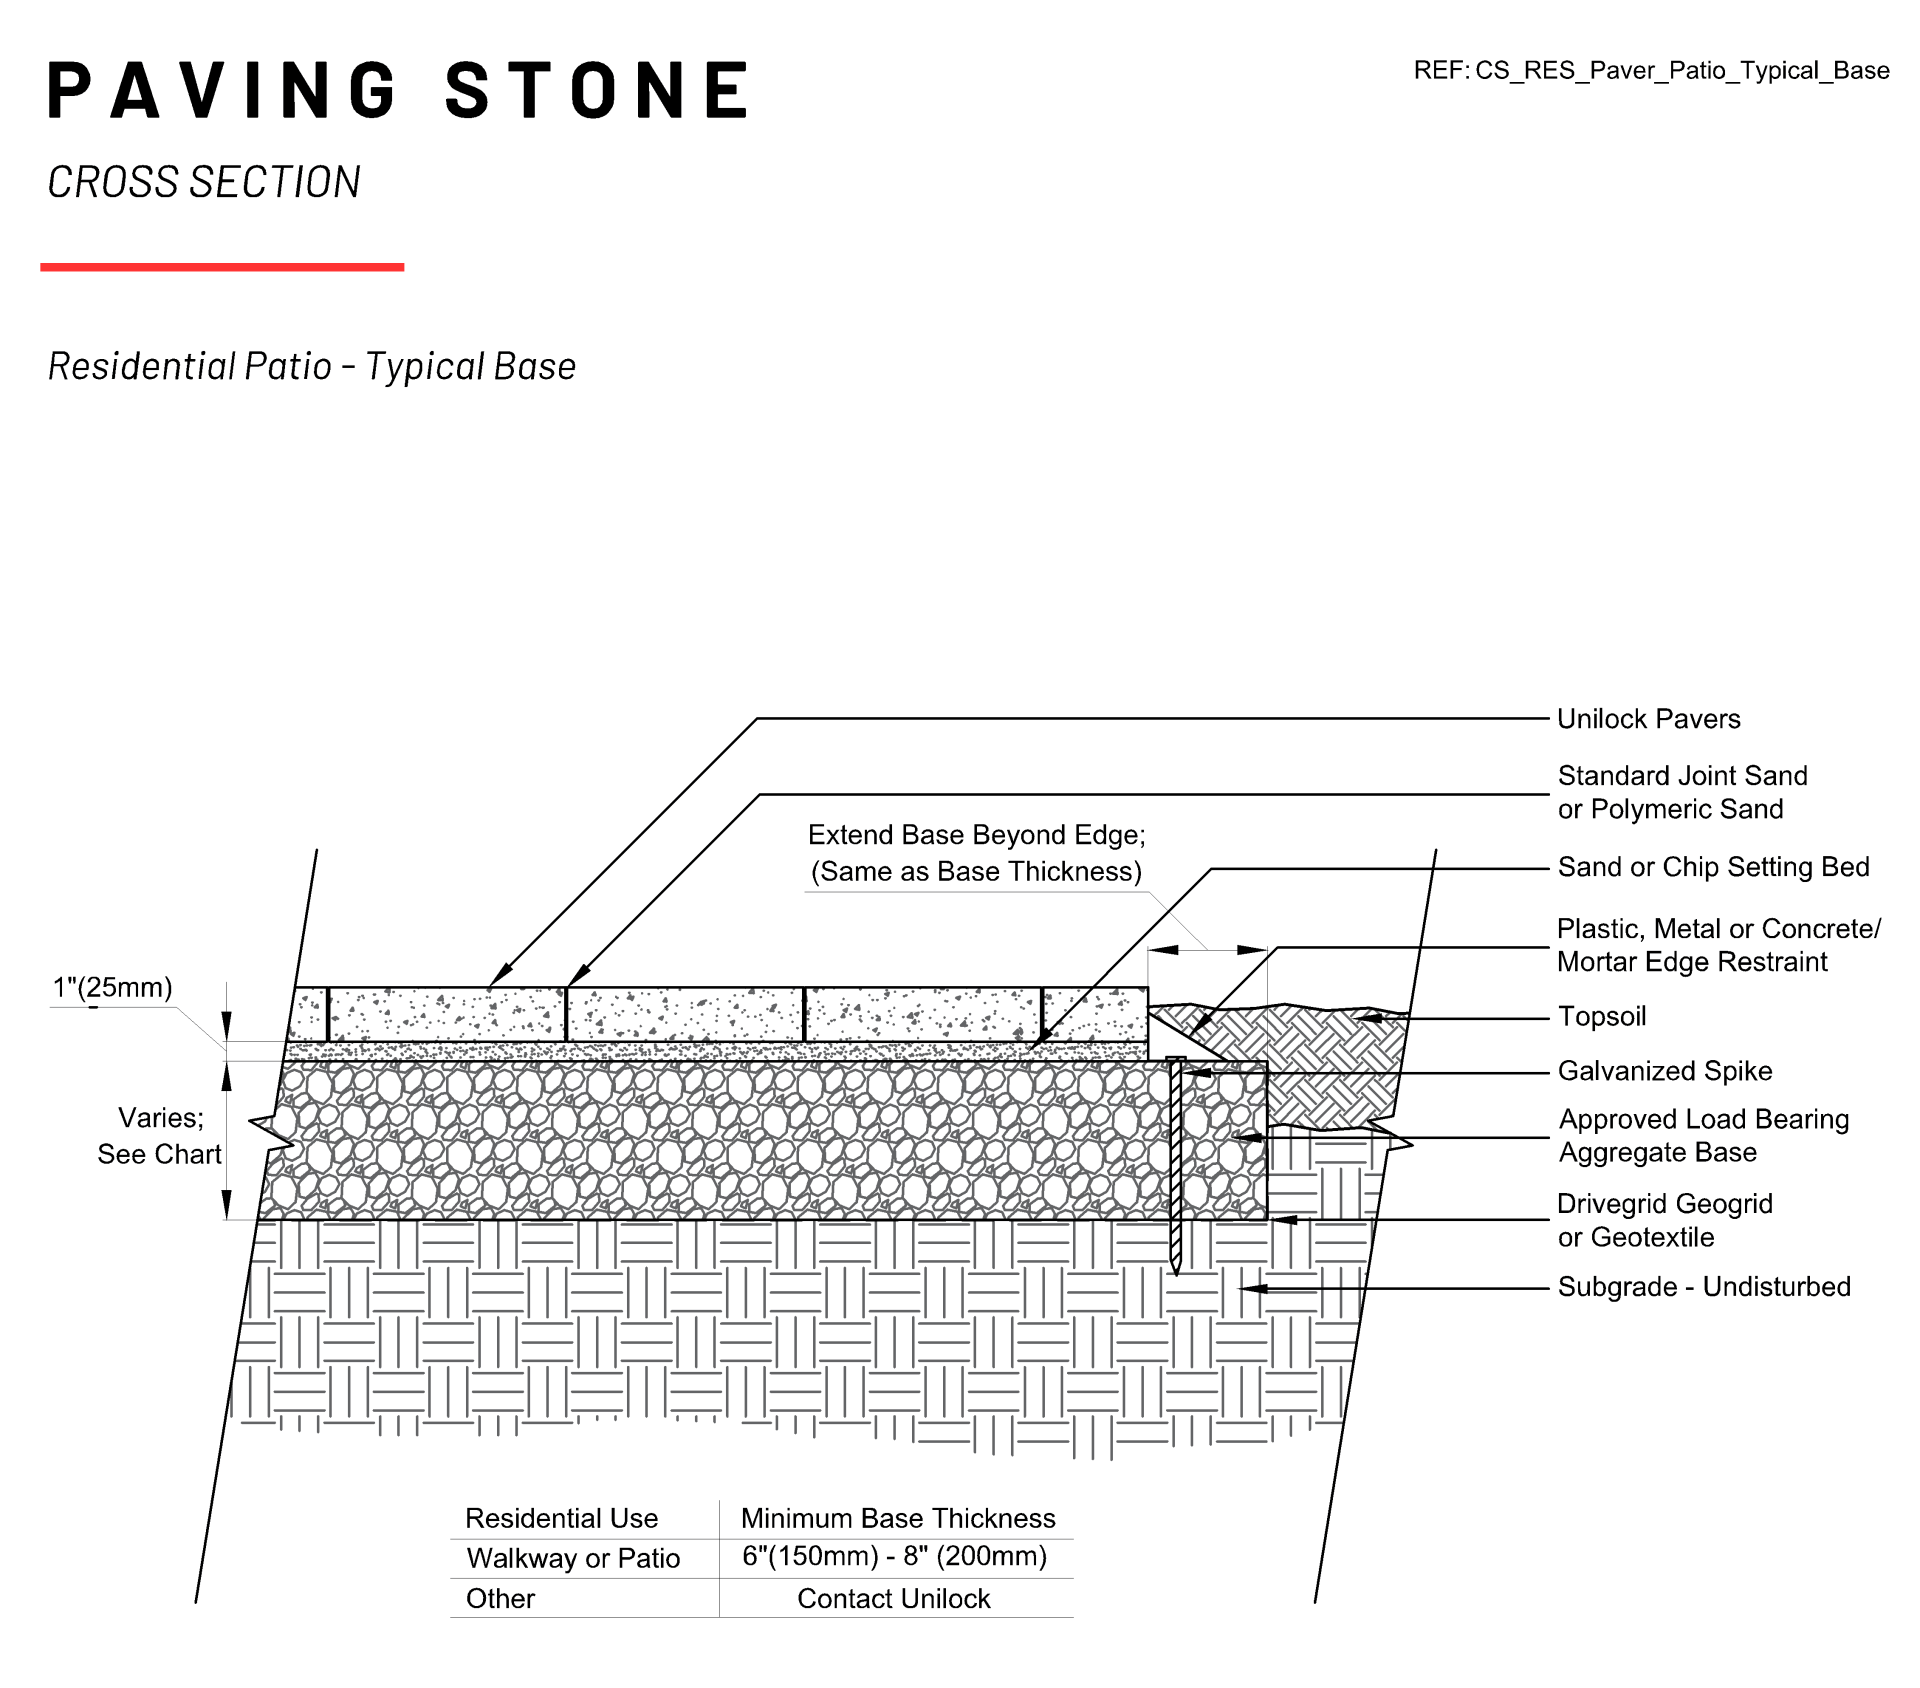 Cross Section Sheet for Brick paver Installation of Patios and Walks